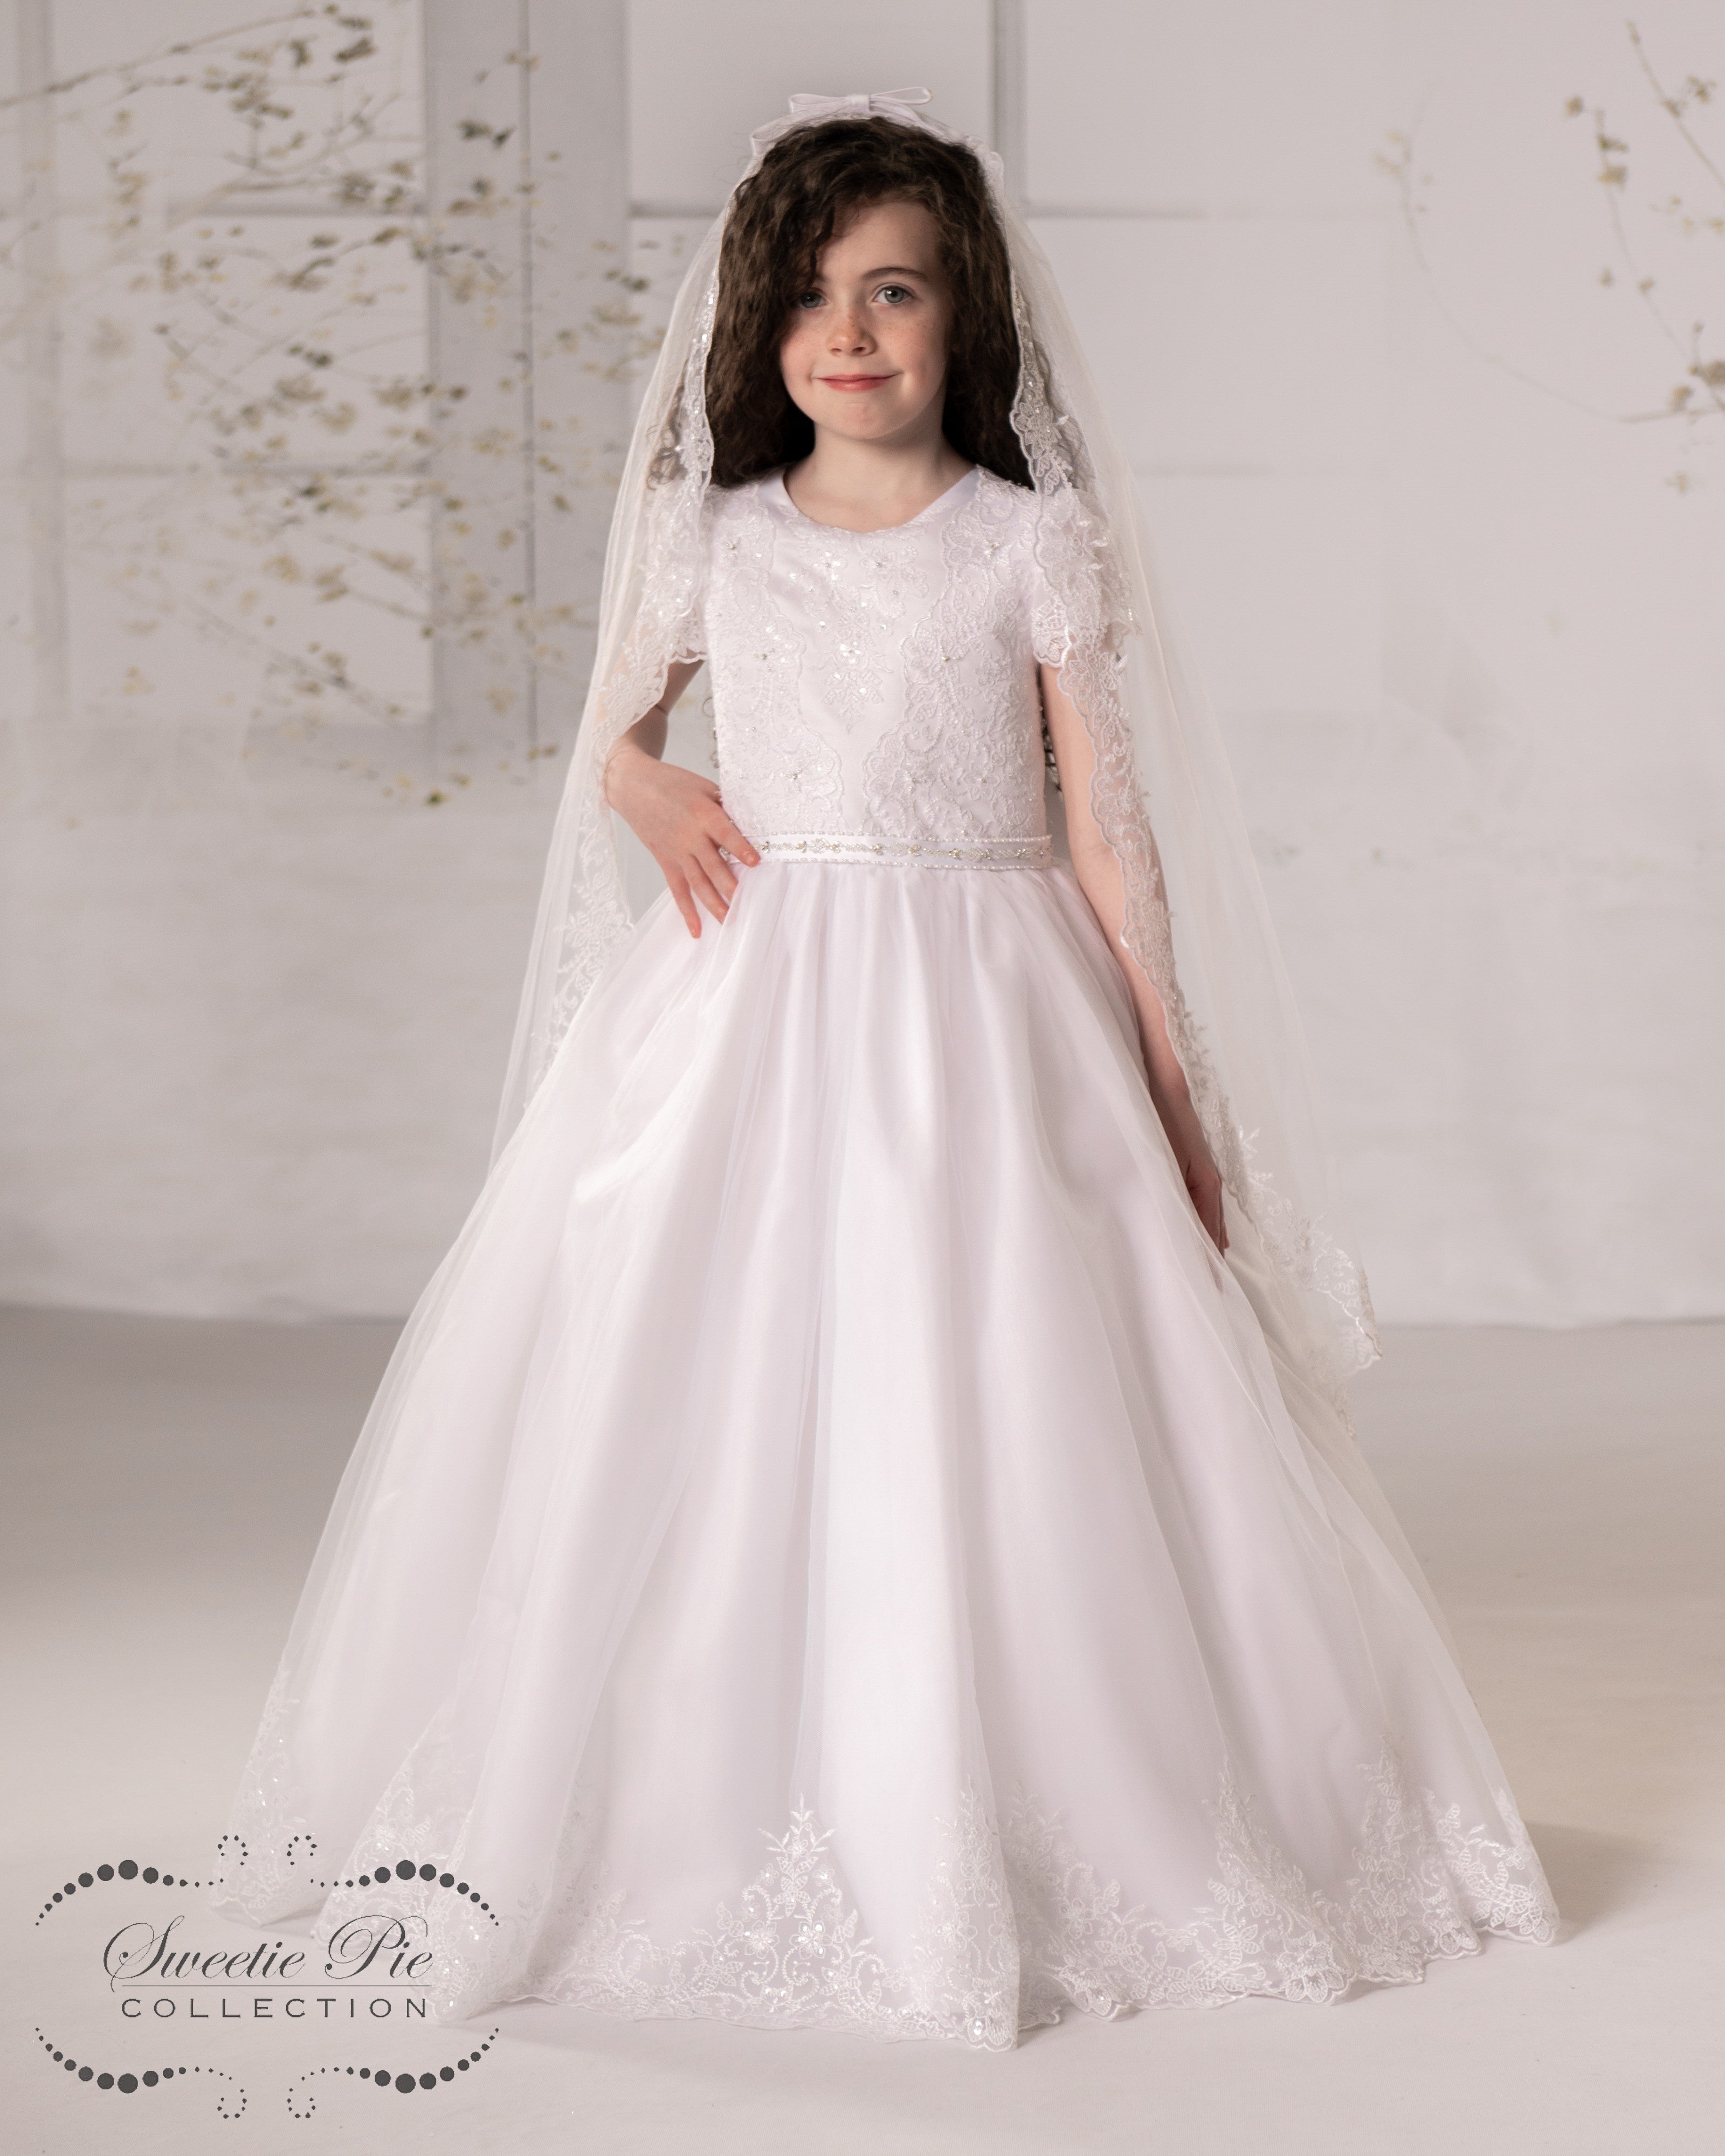 50 Exciting First Holy Communion Gifts Ideas for Boys & Girls